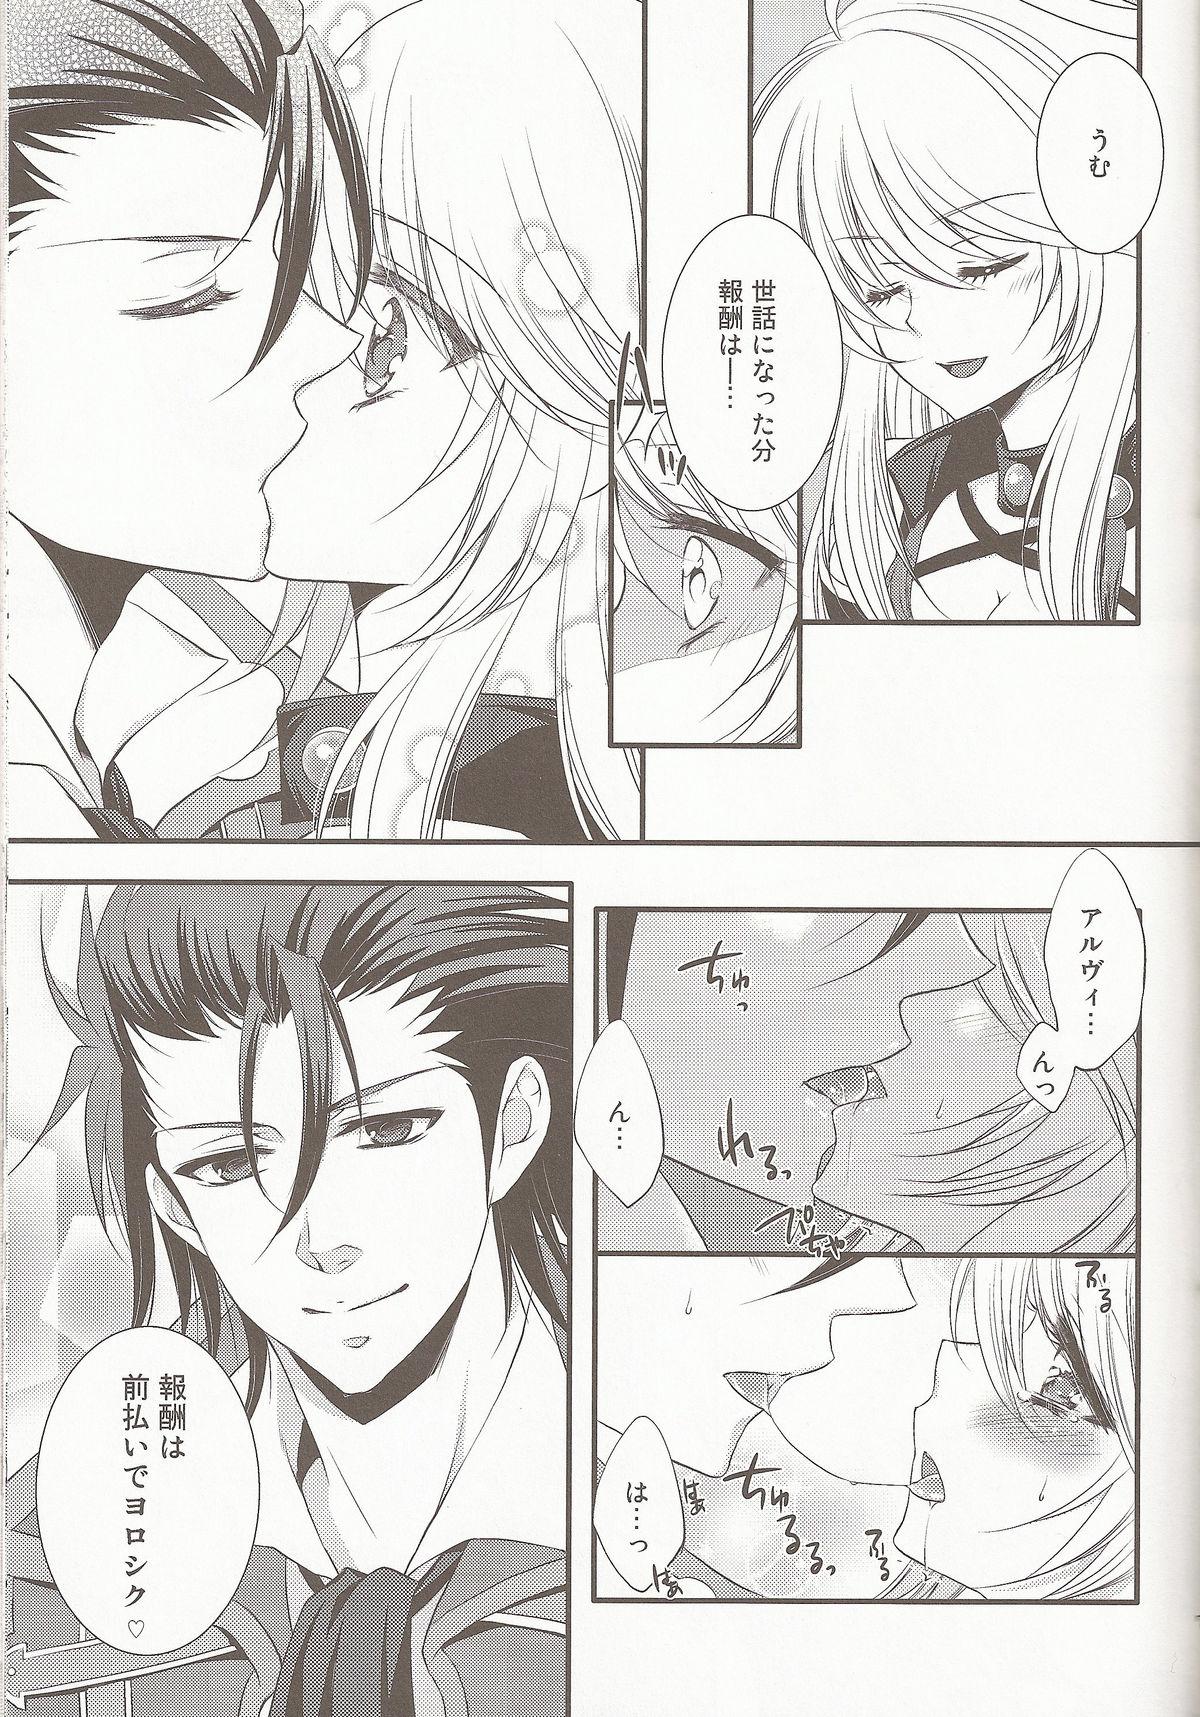 Brazzers External Link - Tales of xillia Scissoring - Page 7